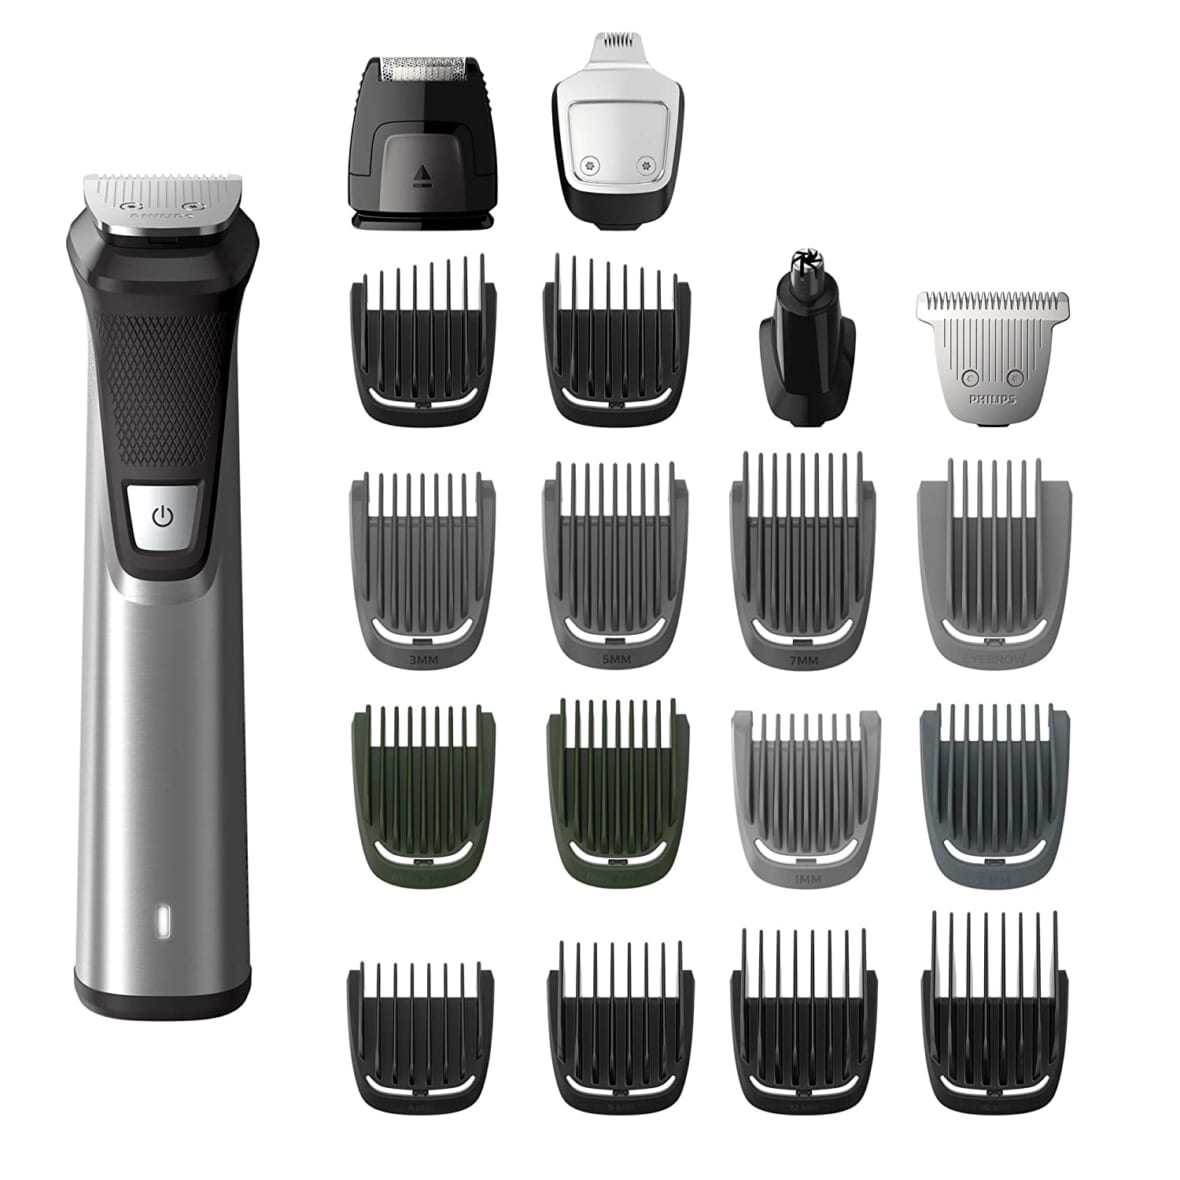 father's day gift ideas from Amazon under $100: multigroomer